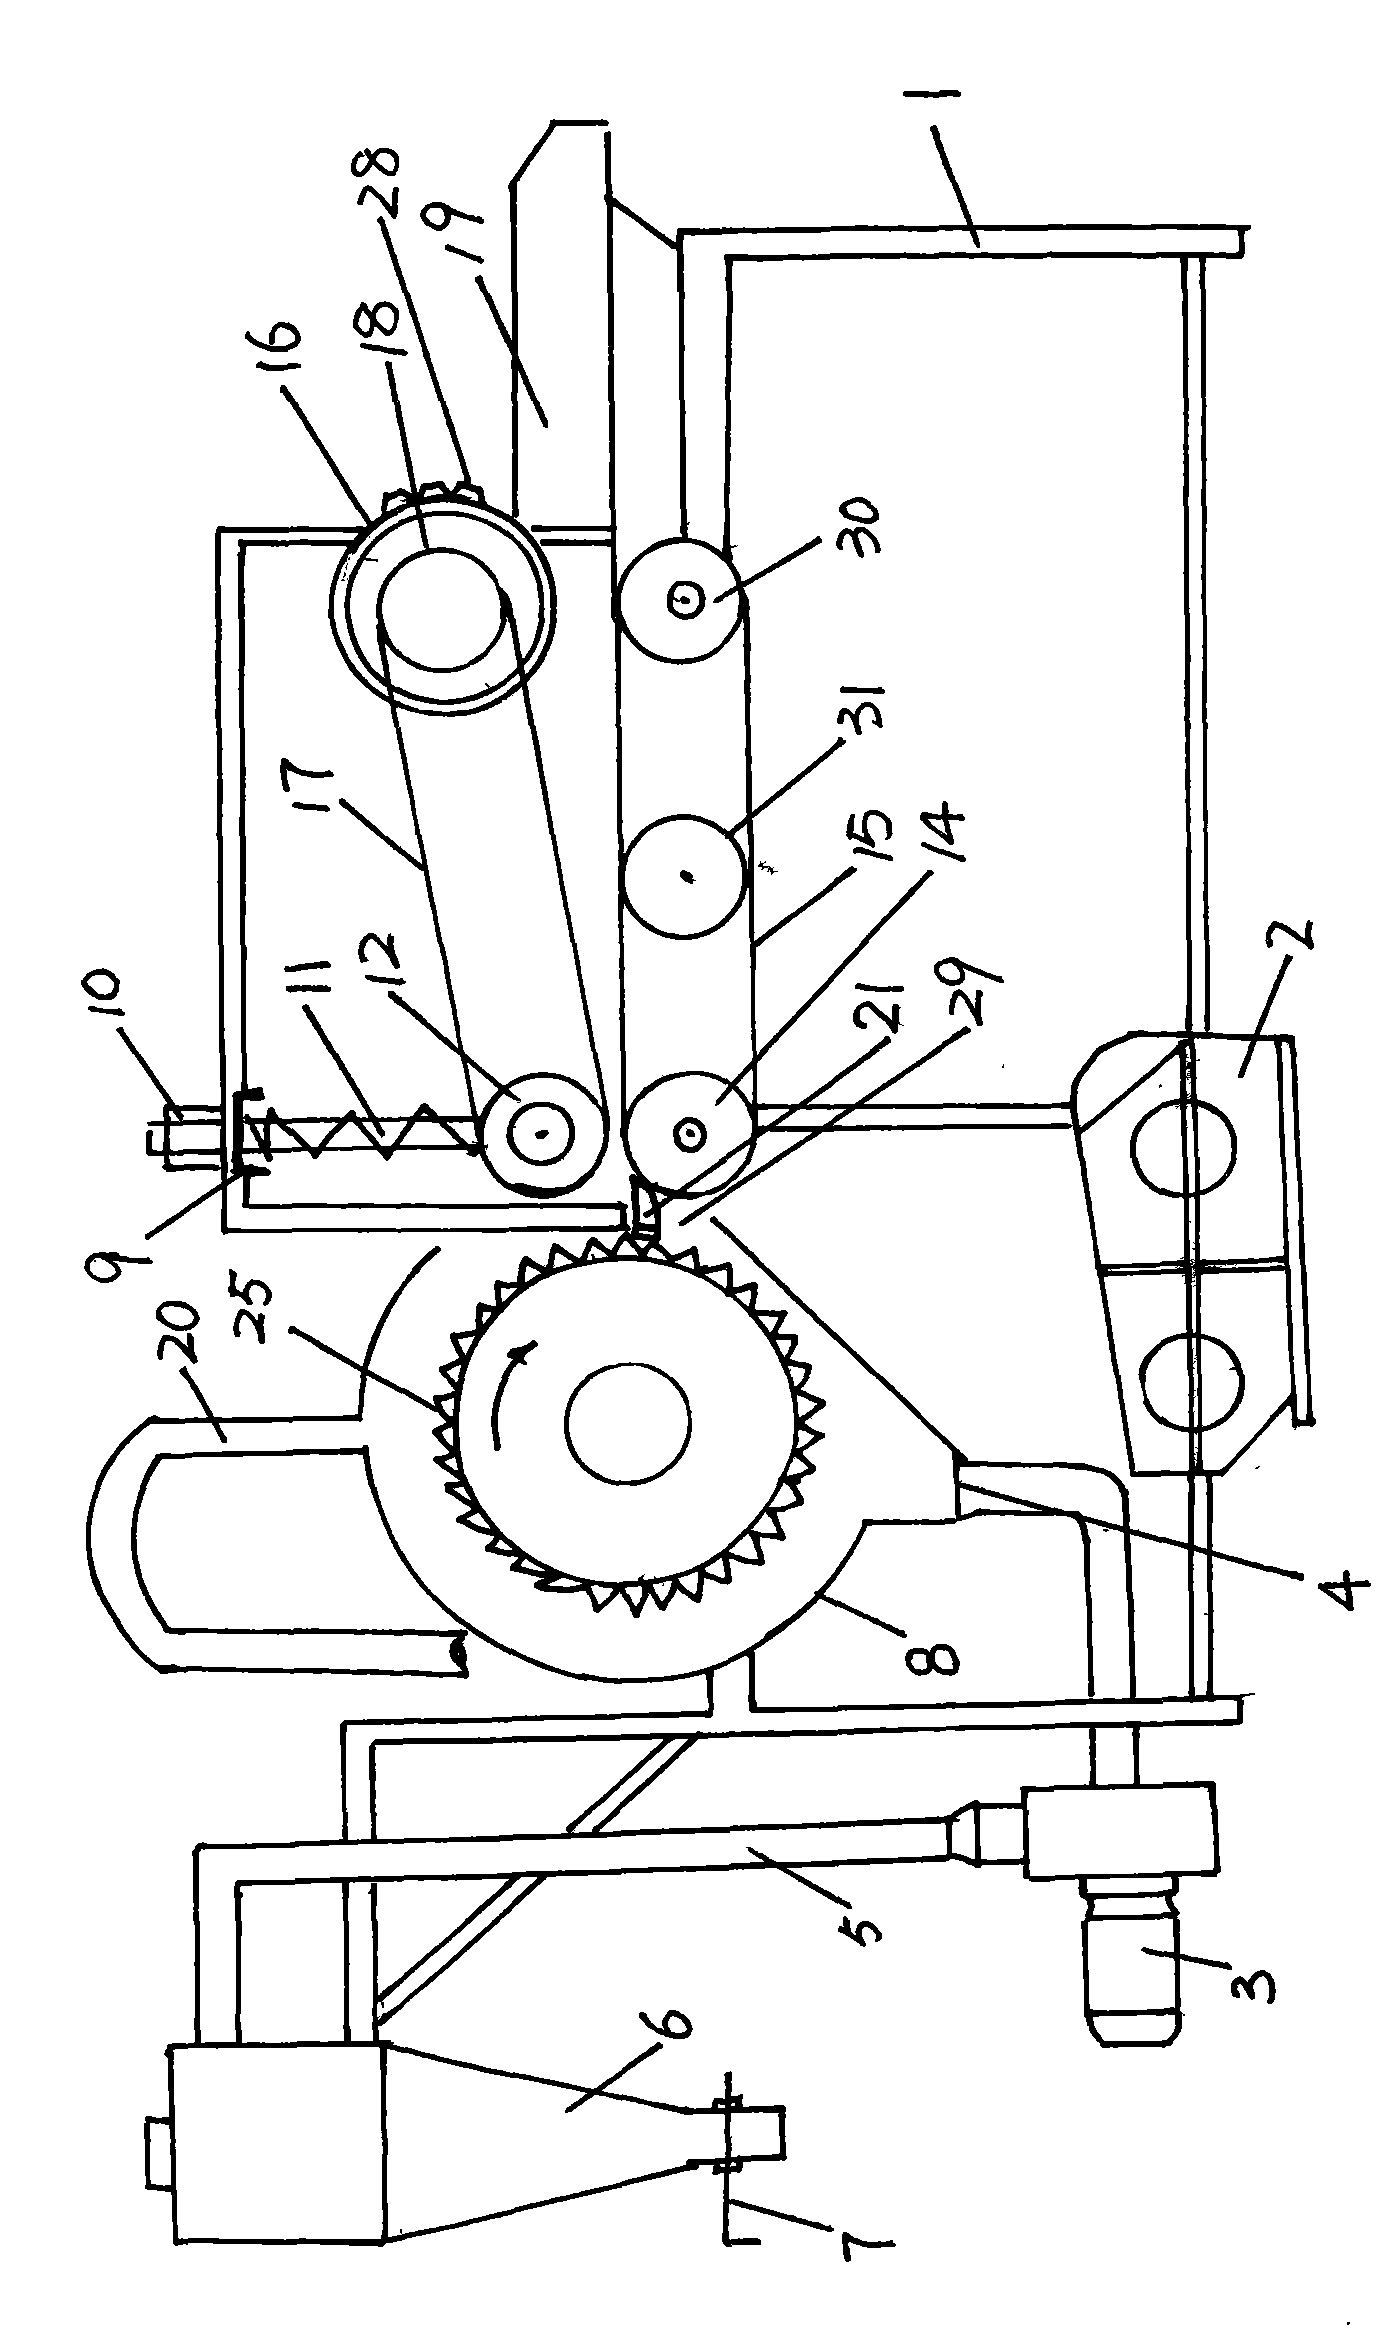 Device for finely crushing biomass